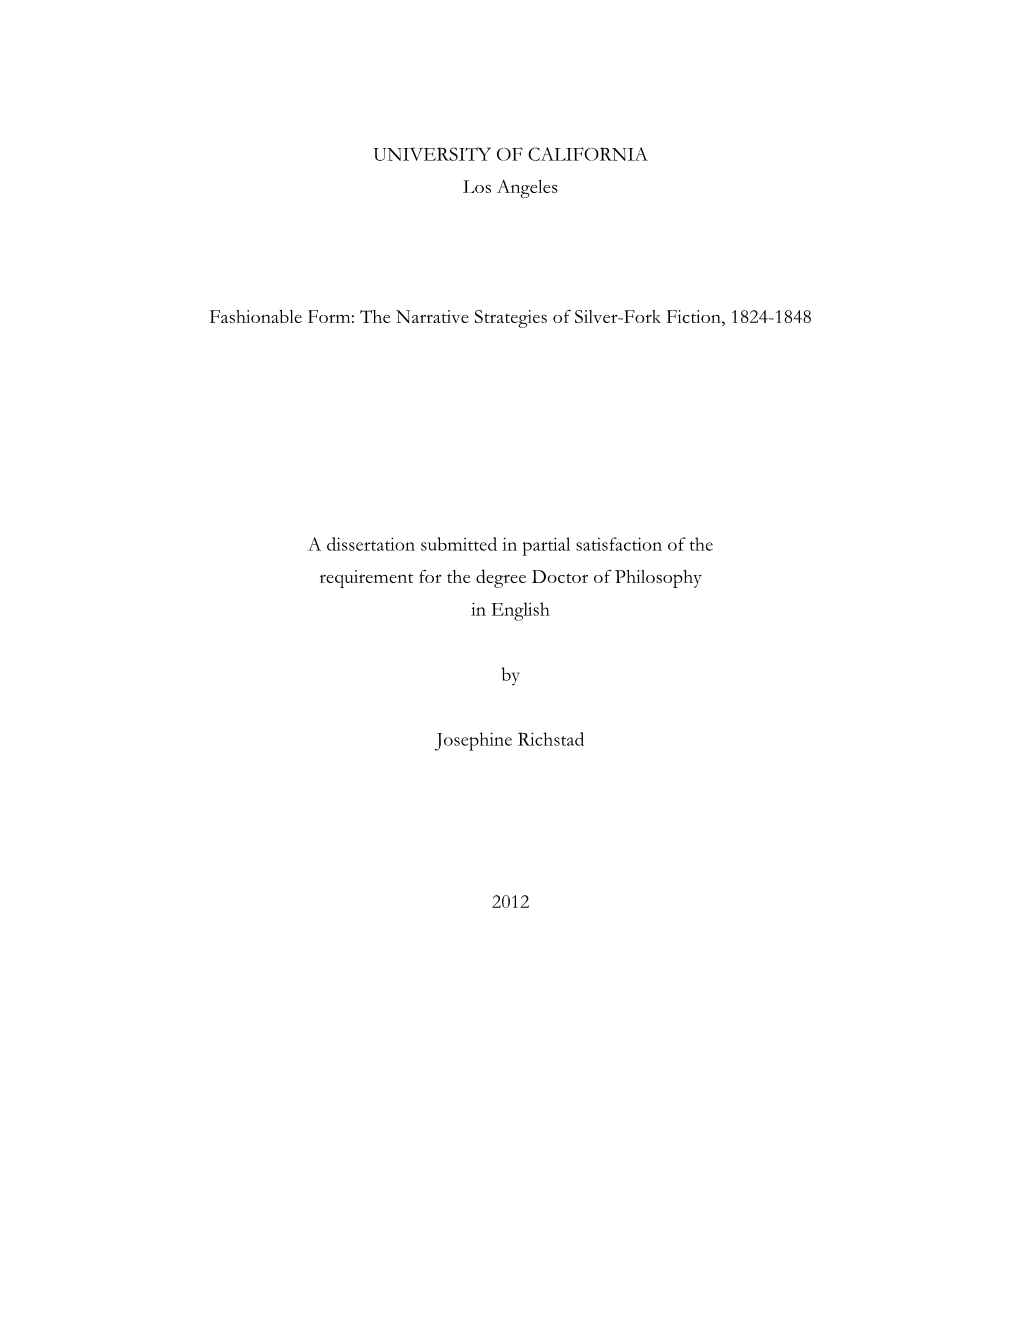 The Narrative Strategies of Silver-Fork Fiction, 1824-1848 a Dissertation